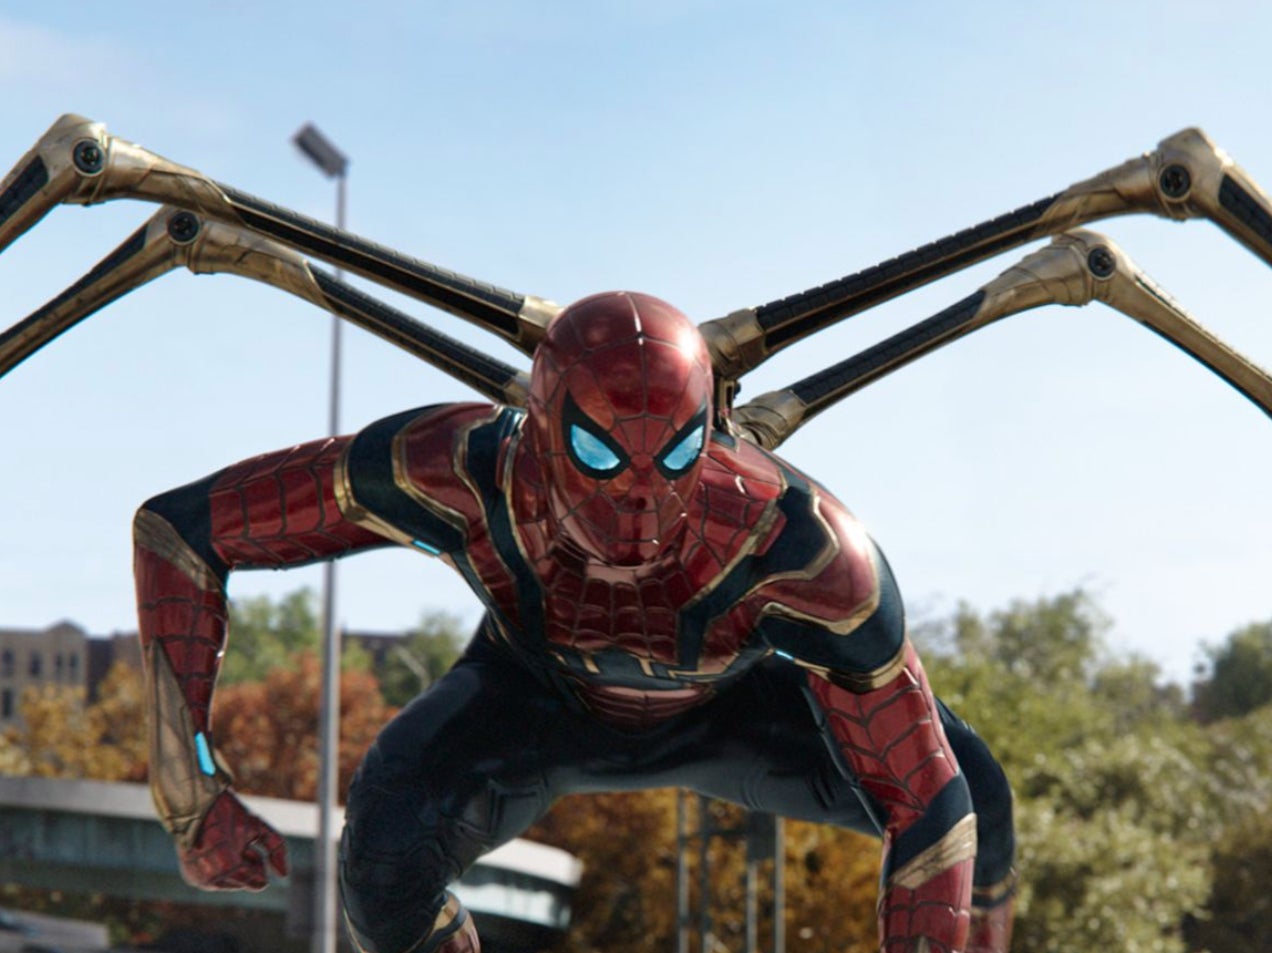 ‘Spider-Man: No Way Home’ has already taken the box office by storm